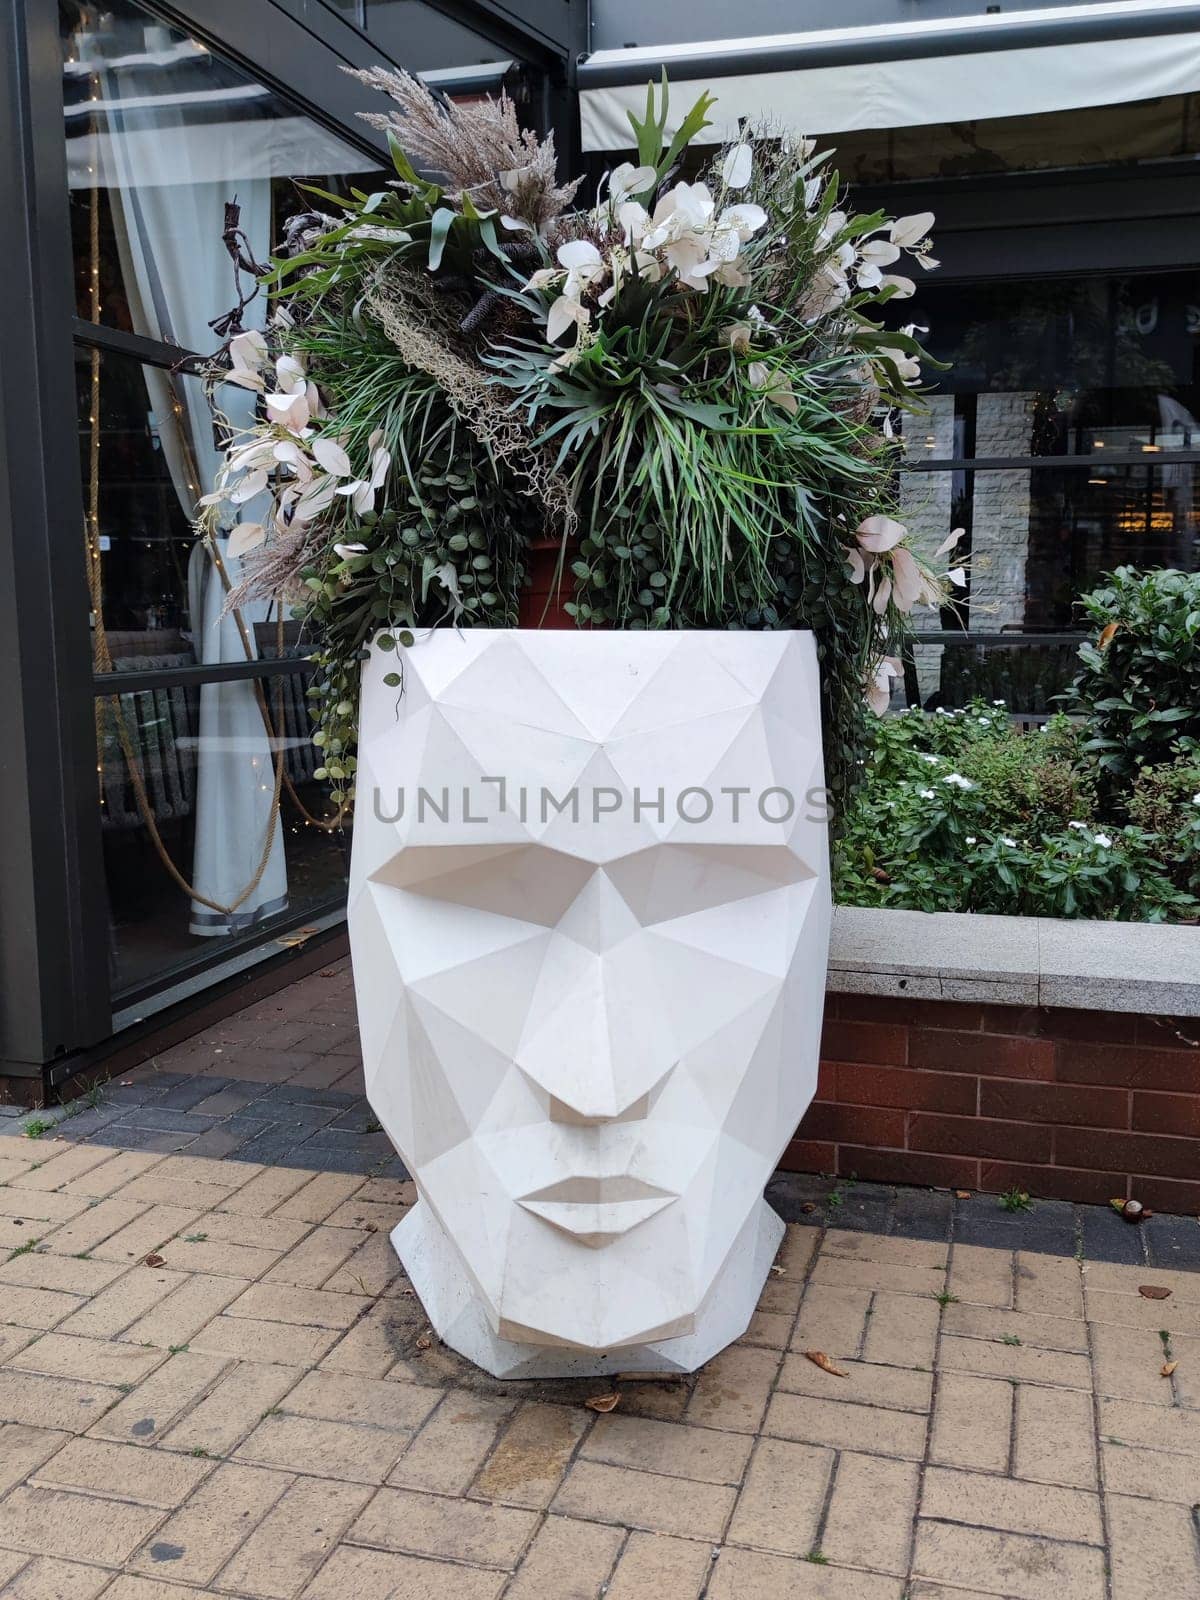 creative outdoor planter in the shape of a human head with flowers instead of hair.